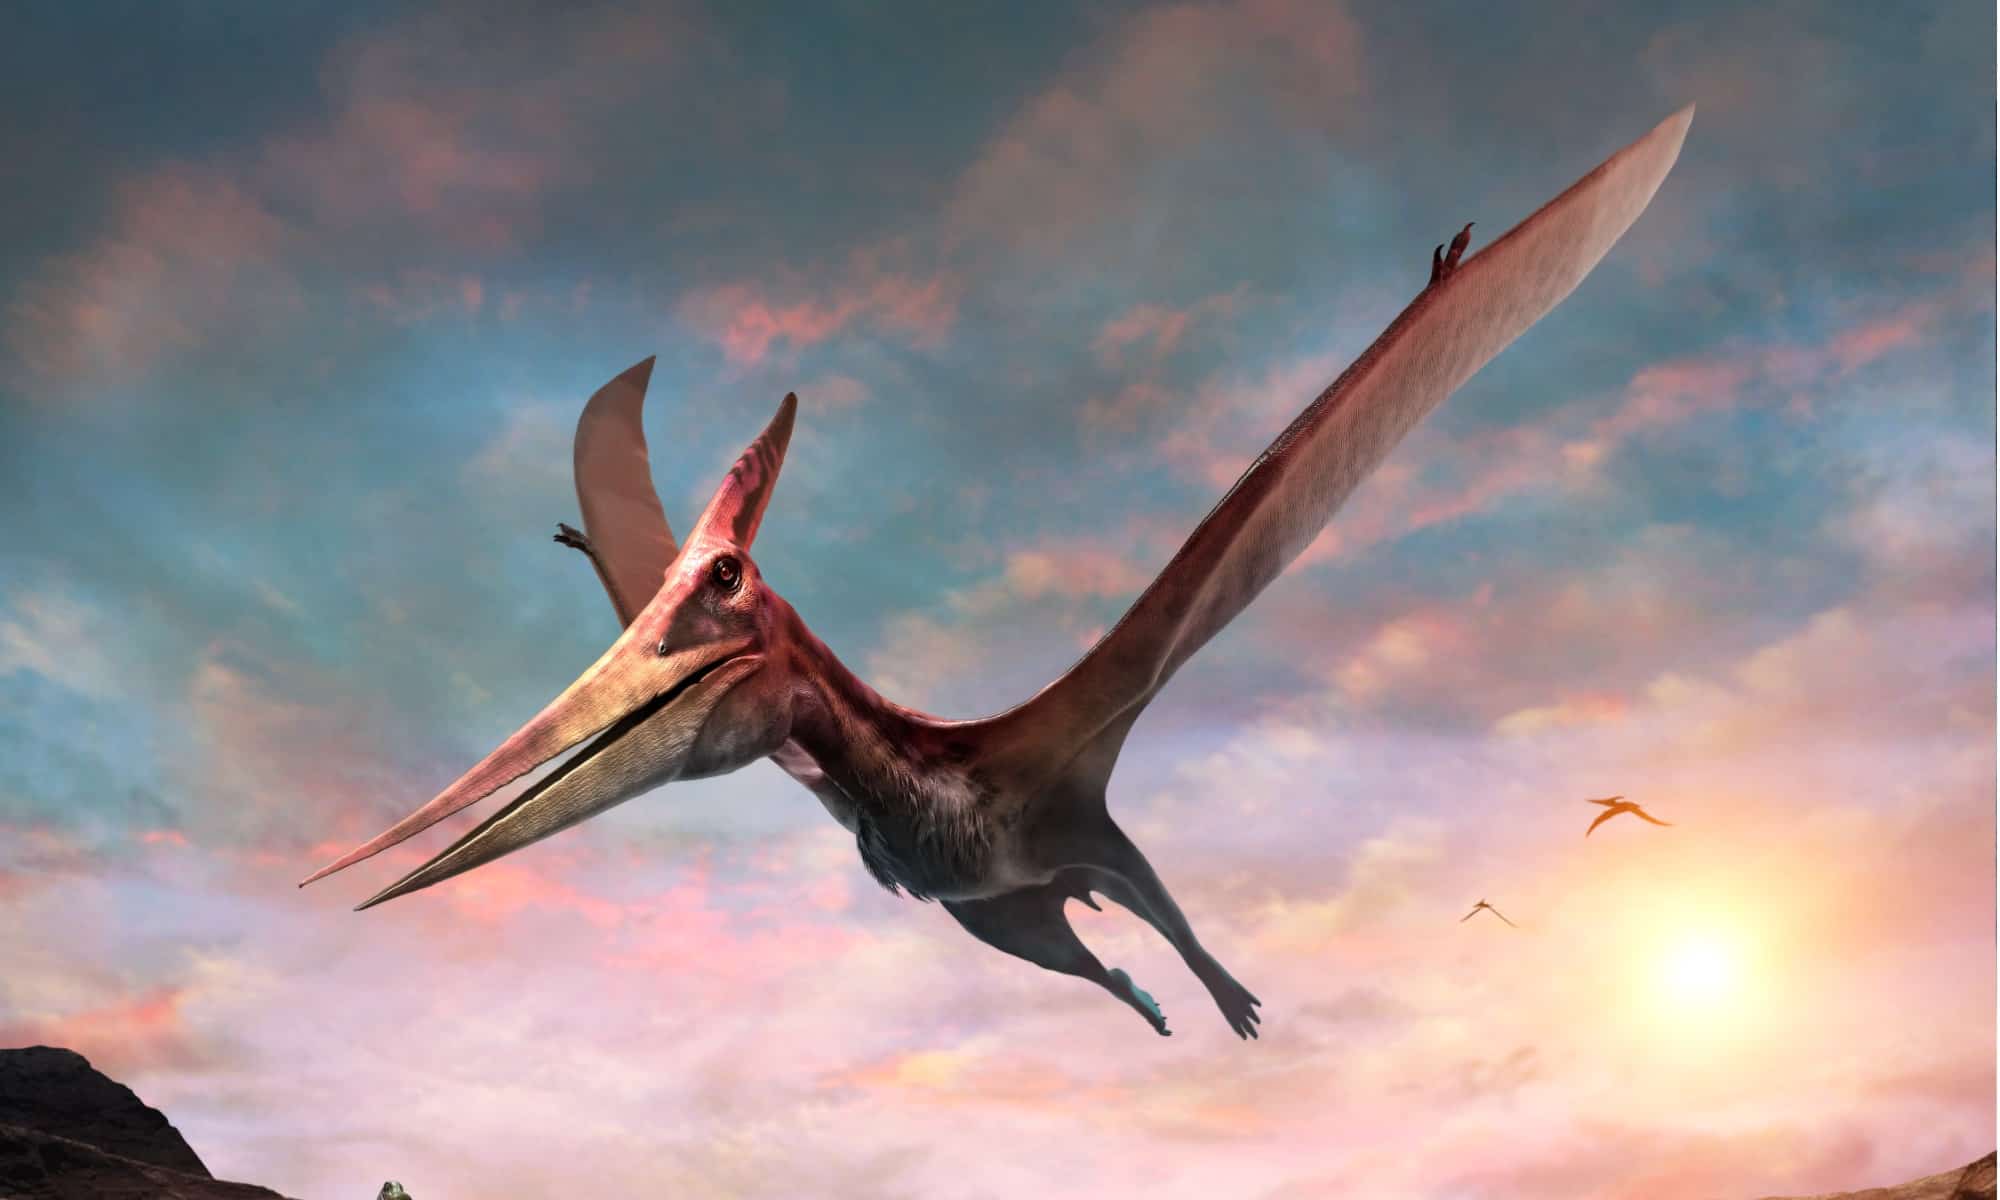 Pteranodon was one of the largest winged reptiles.